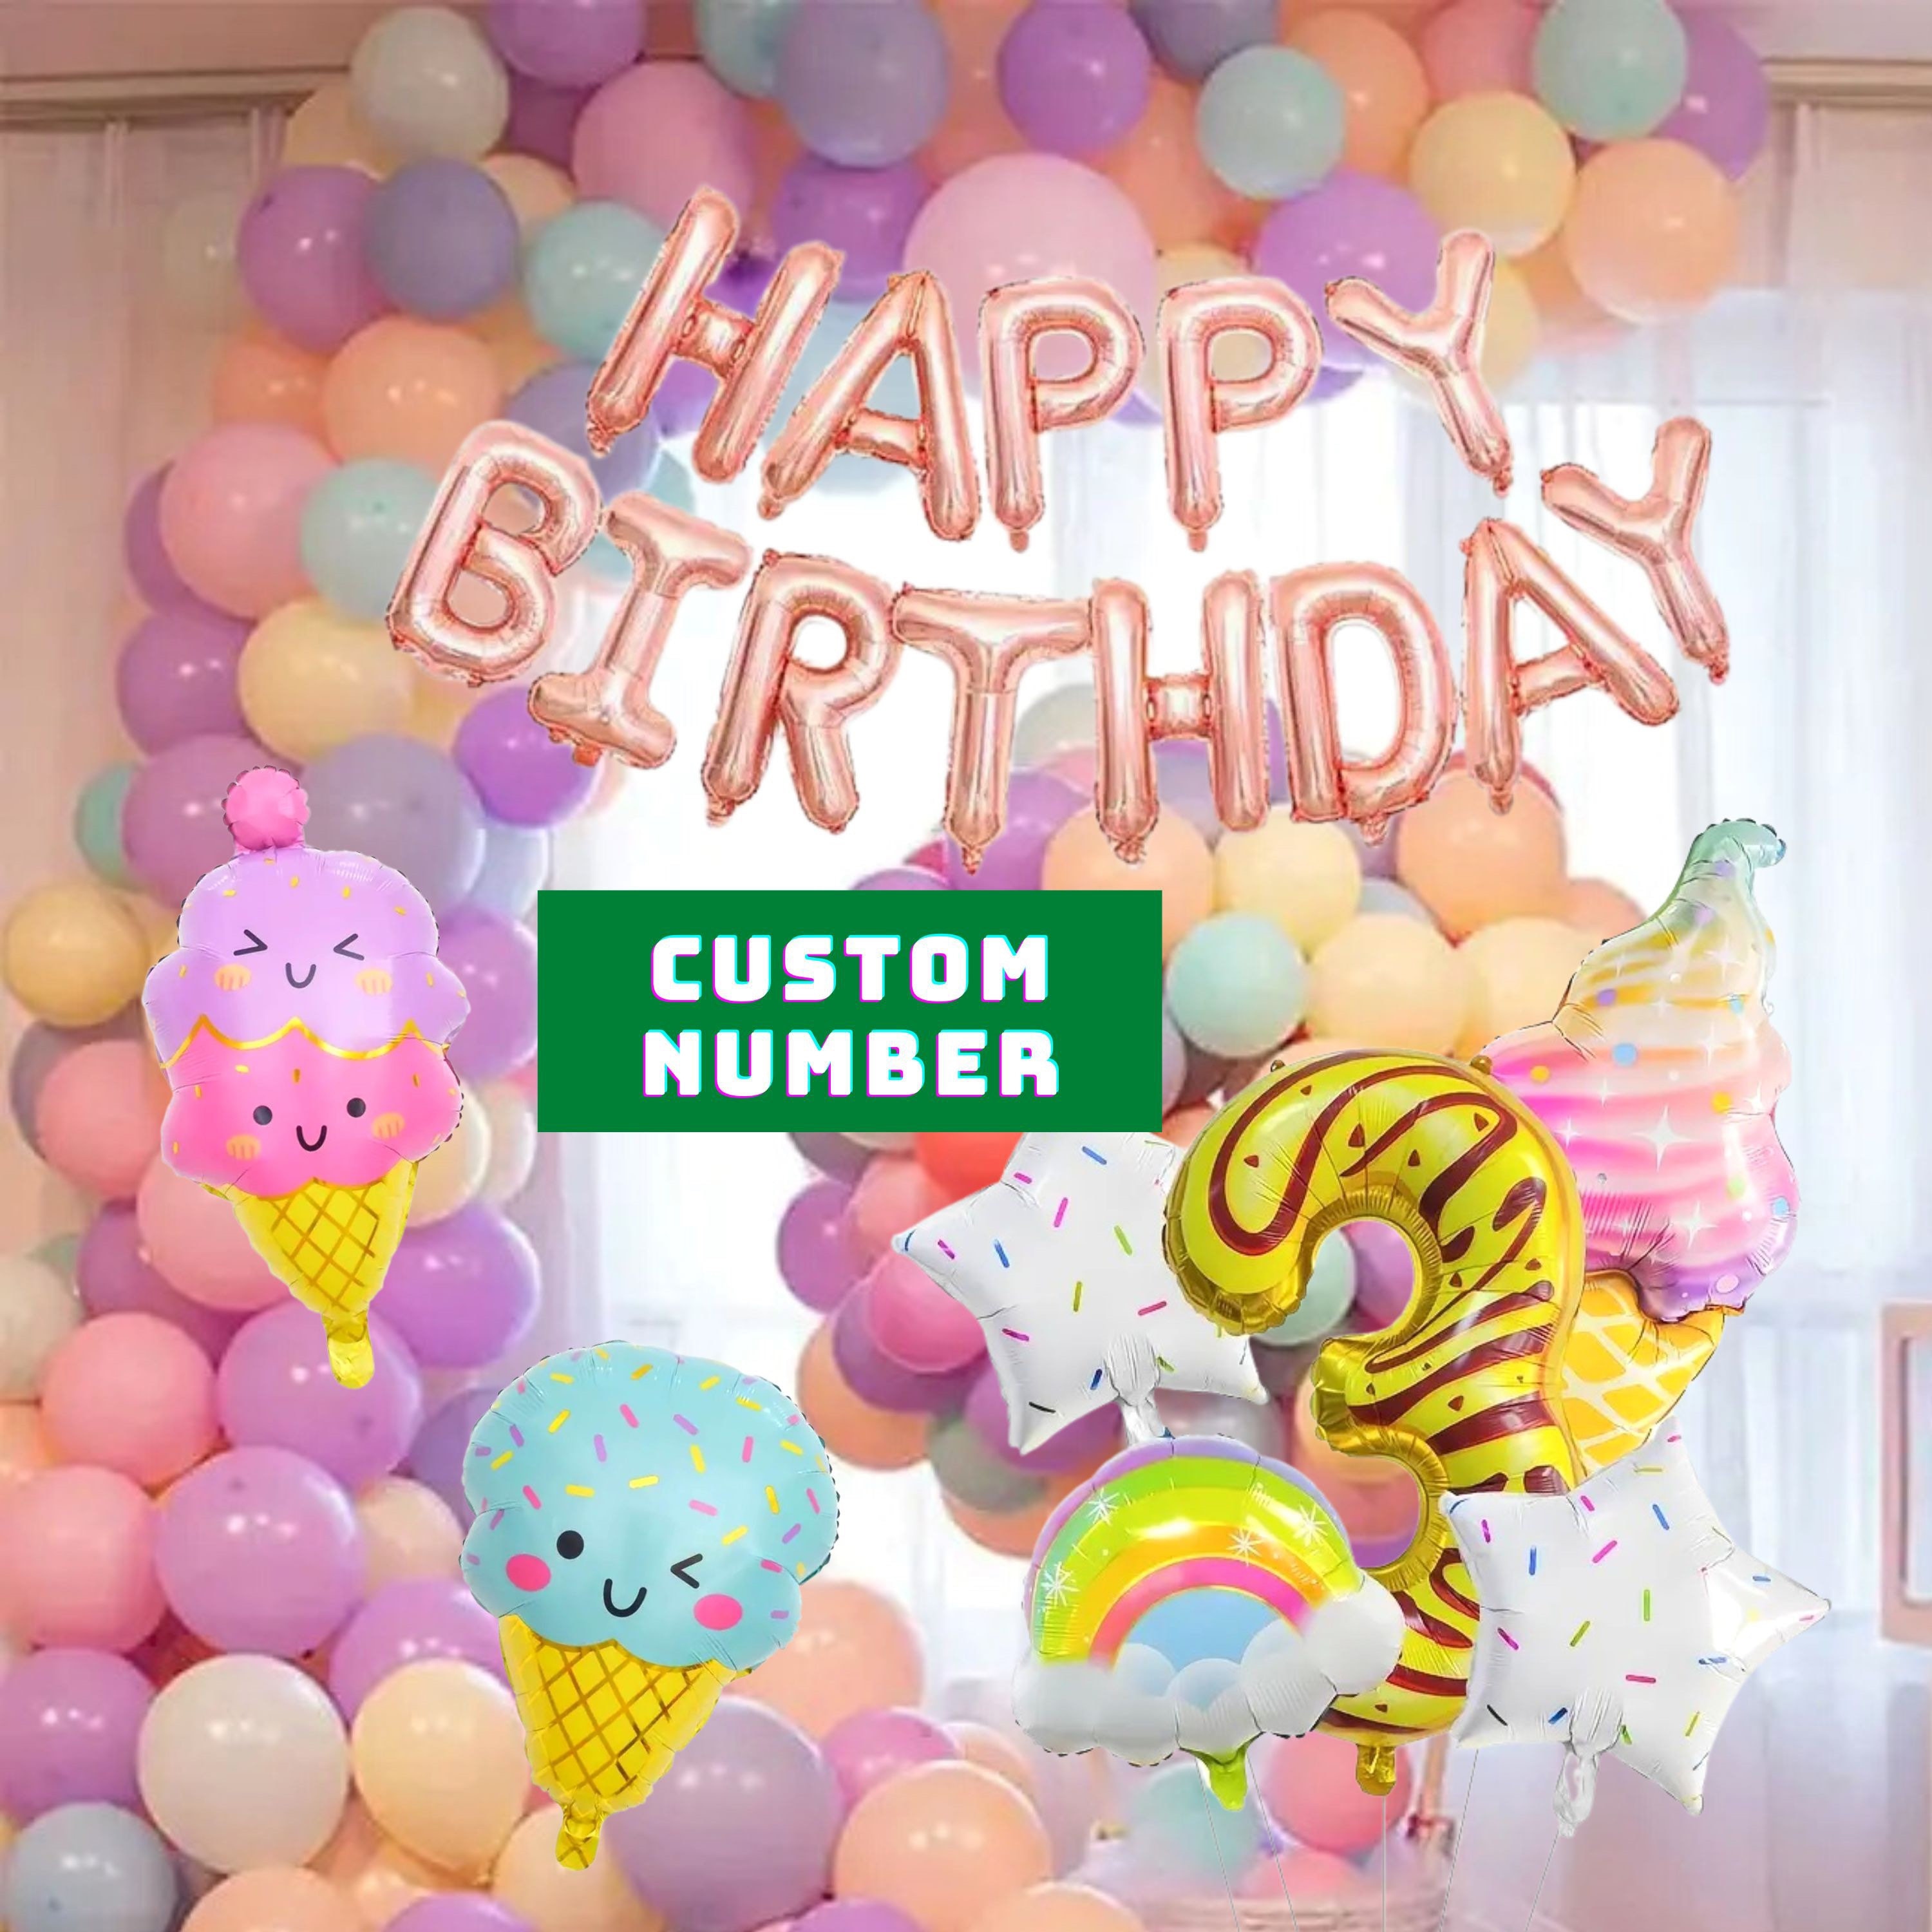  50 pcs Care cute Bears Party Decorations Party Favors Includes  Happy Birthday Banner,Cake Topper,Cupcake Toppers,Hanging Swirl,Balloons Birthday  Party Decorations Favors for Kids : Toys & Games